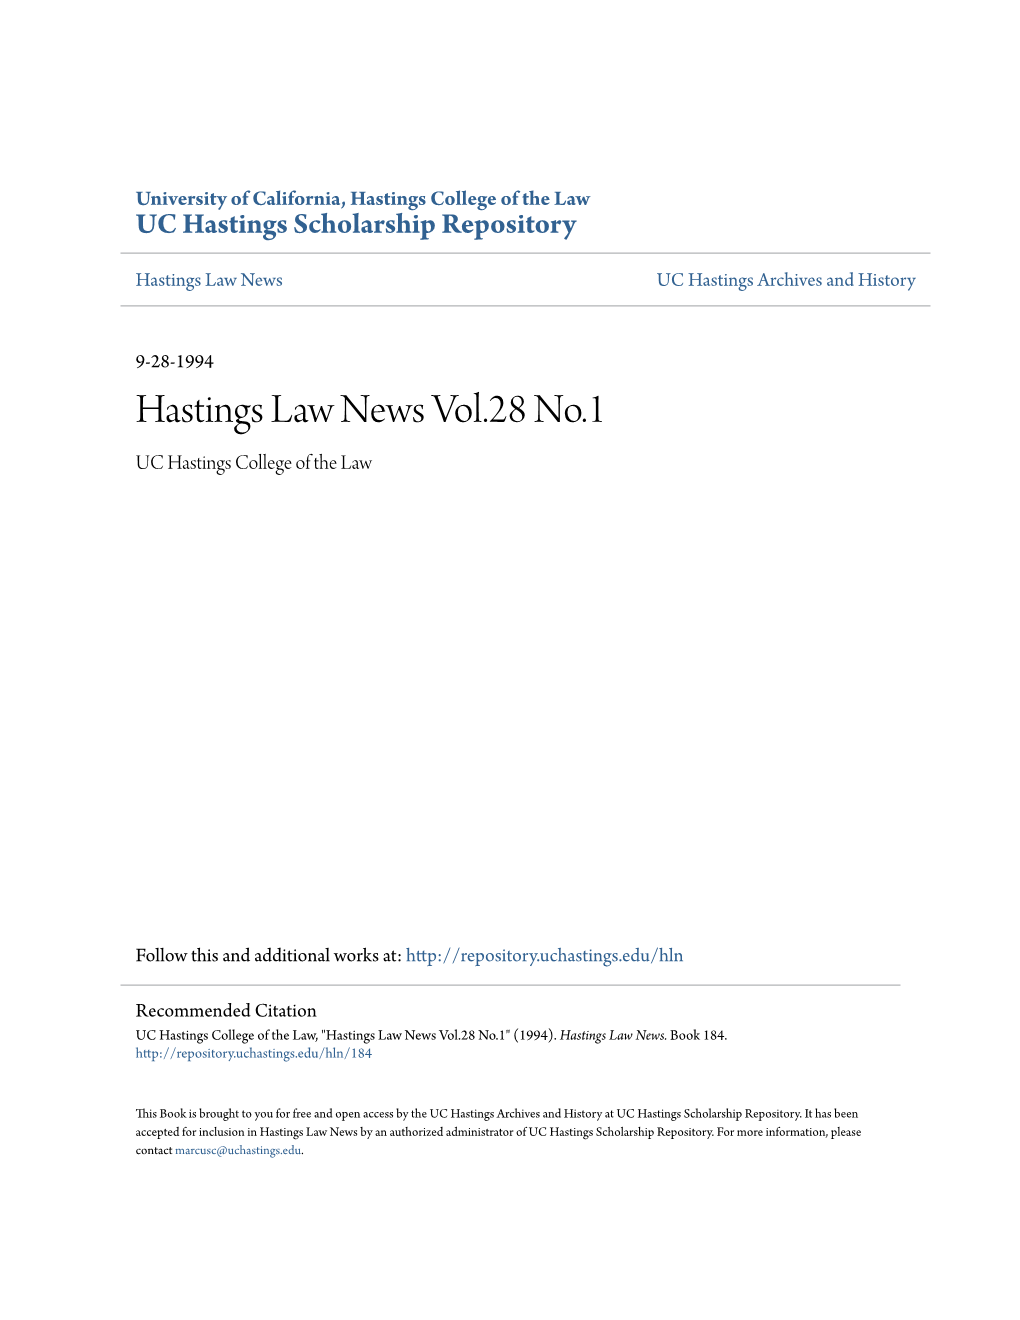 Hastings Law News Vol.28 No.1 UC Hastings College of the Law